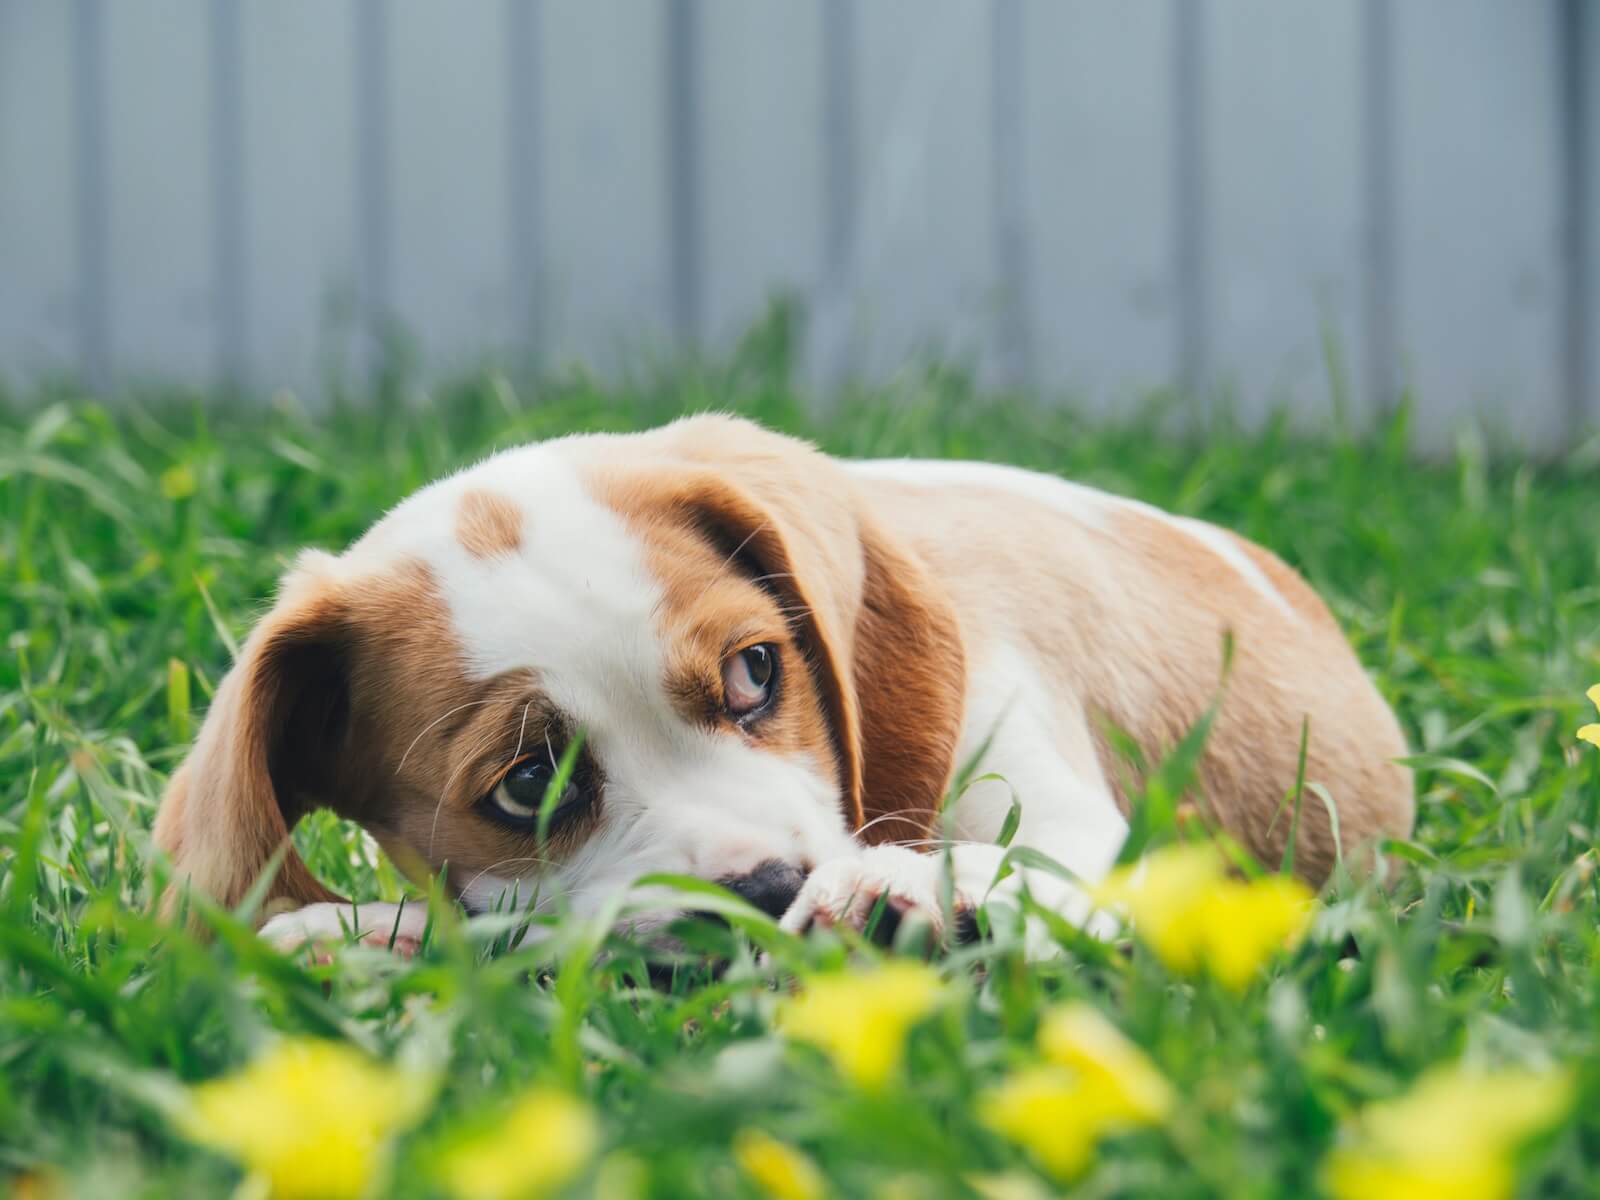 Brown and white puppy lying on green grass with yellow flowers. Photo by Marcus Wallis on Unsplash